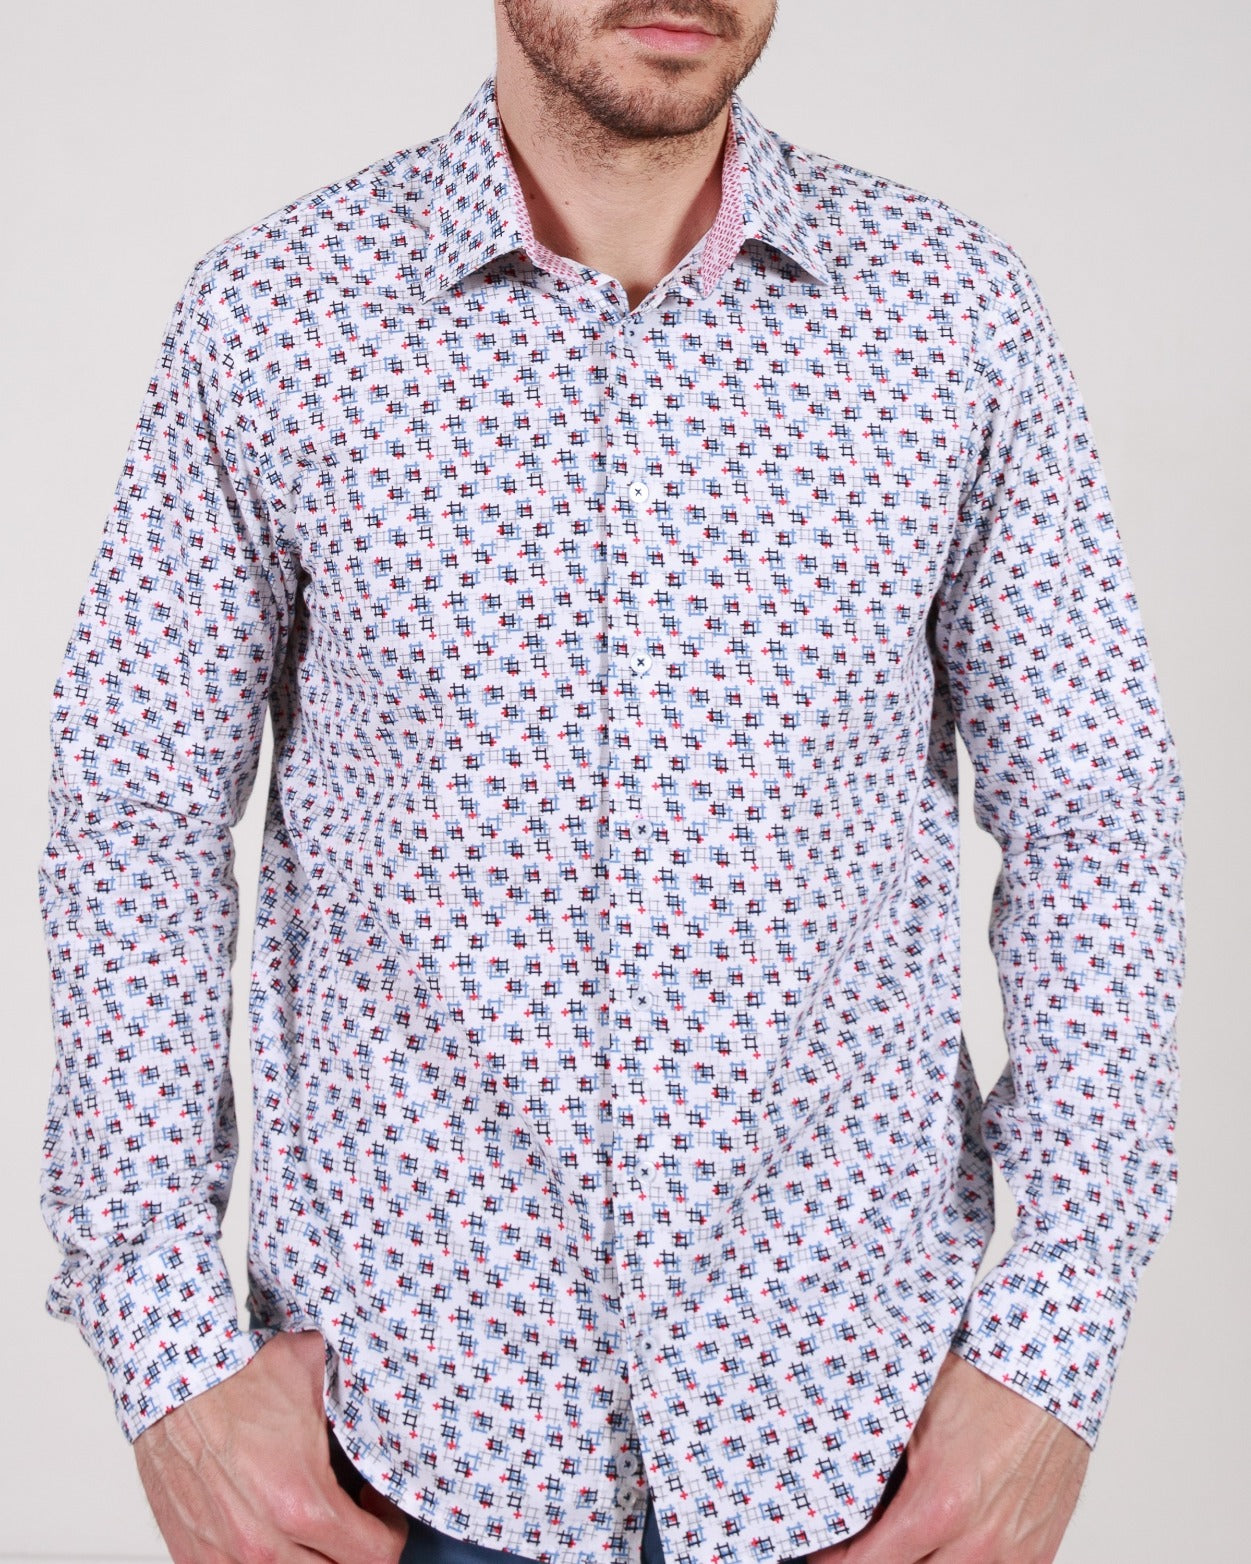 Abstract Geometric Printed White Long Sleeve Cotton Shirt